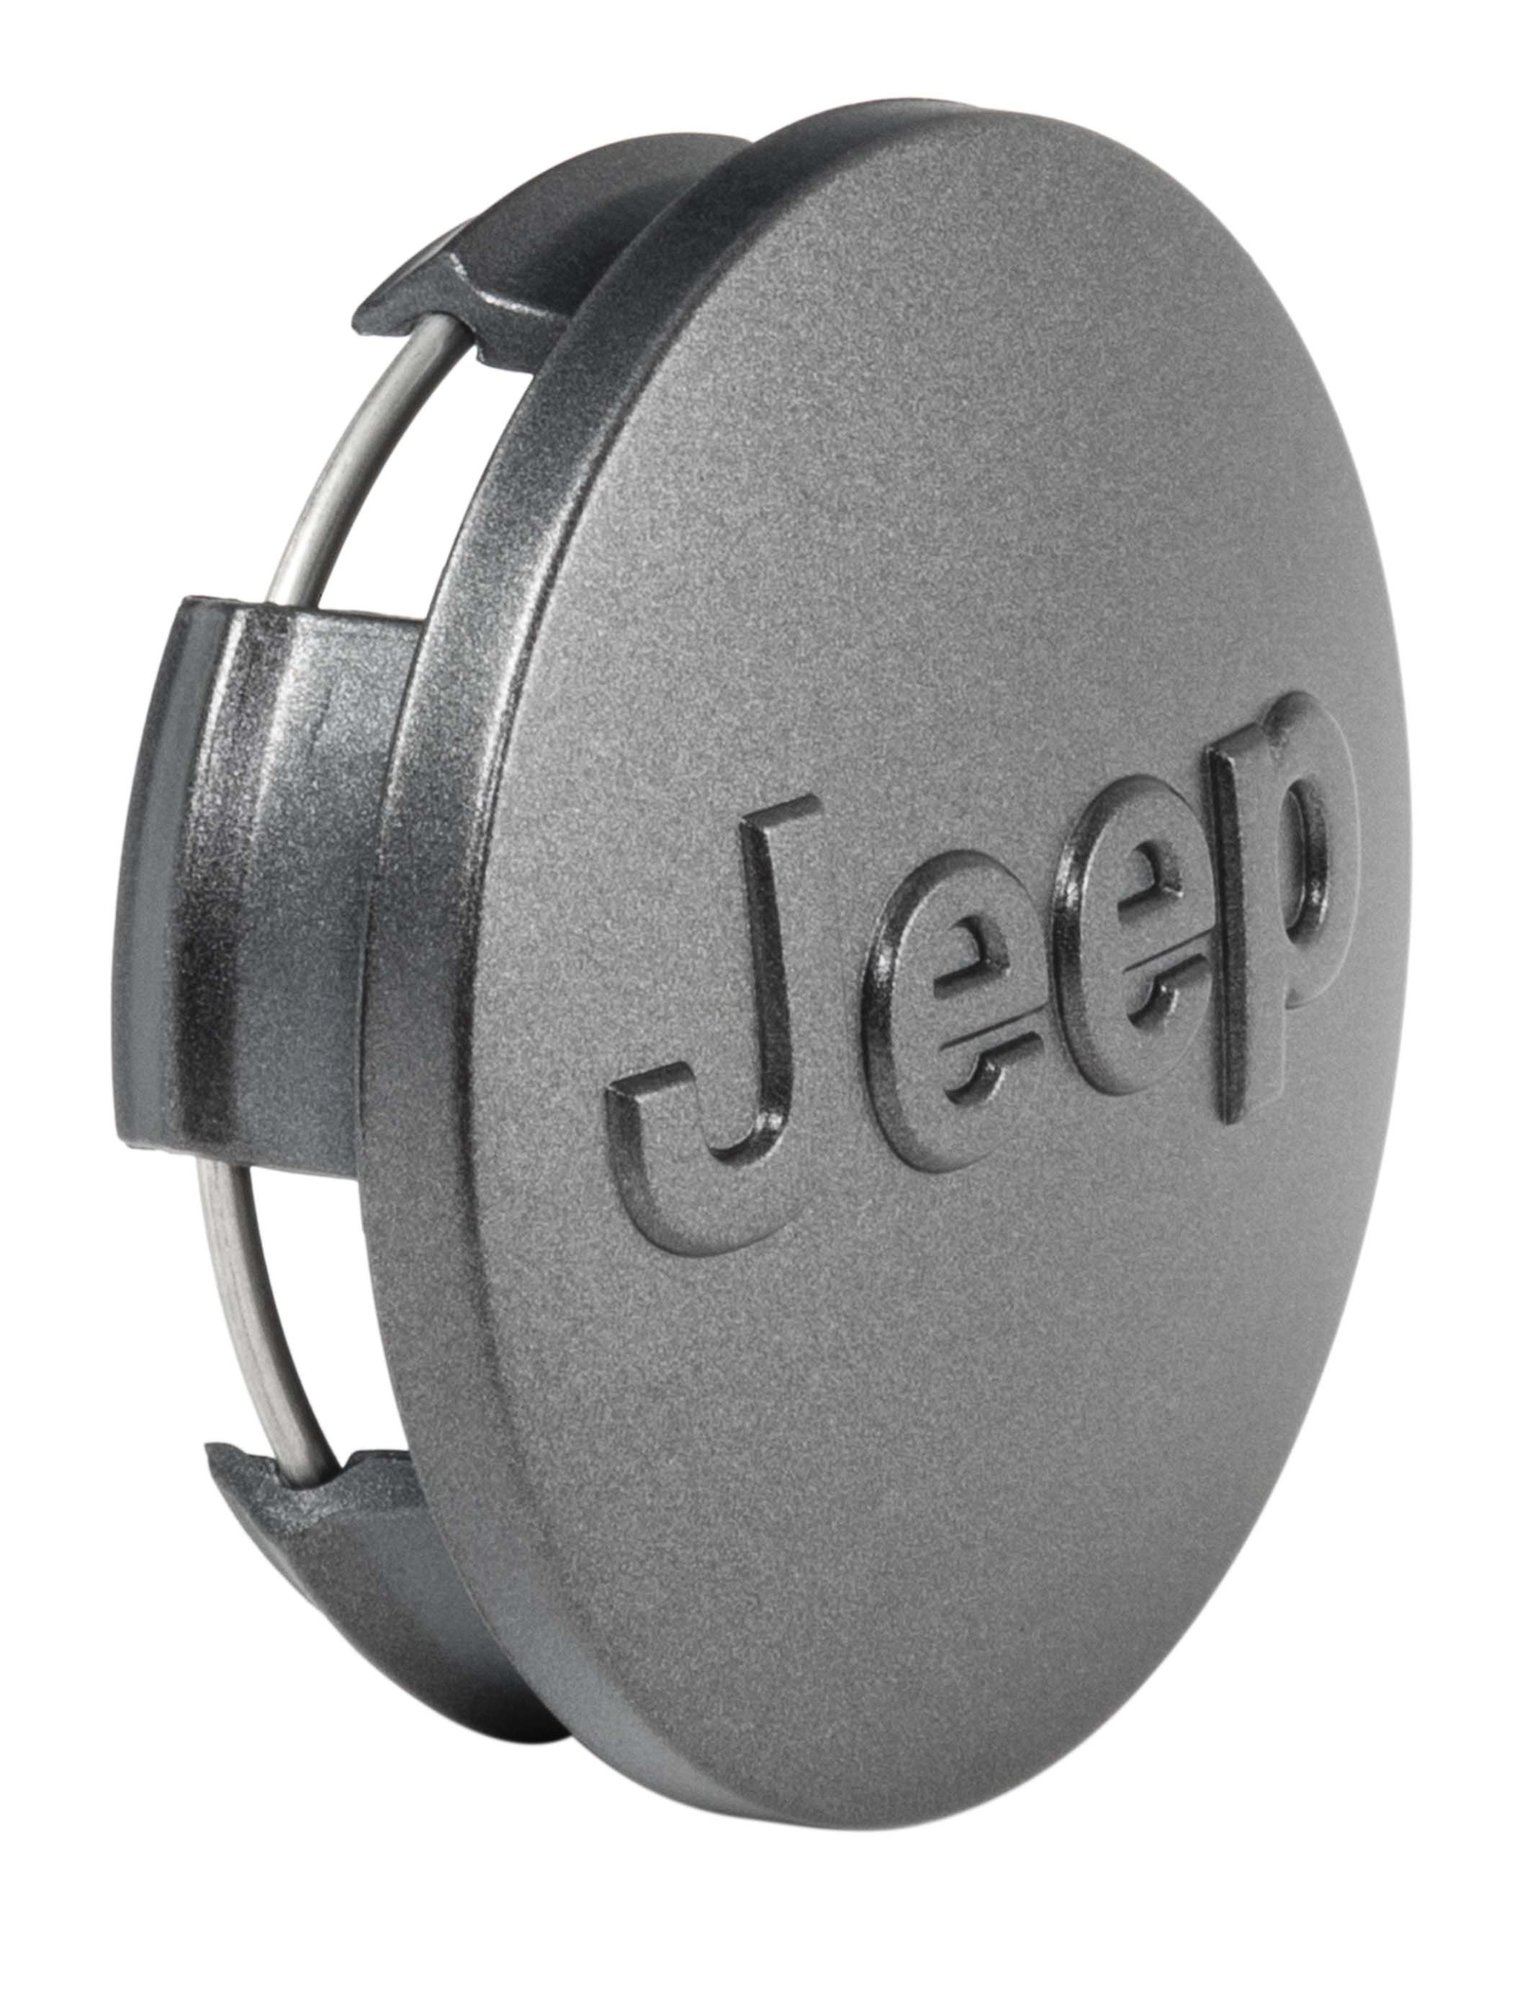 Mopar 1LB77MALAC Recon Edition Center Cap in Gray for 07-21 Jeep Wrangler JK,  JL, and 20-21 Gladiator JT with 17